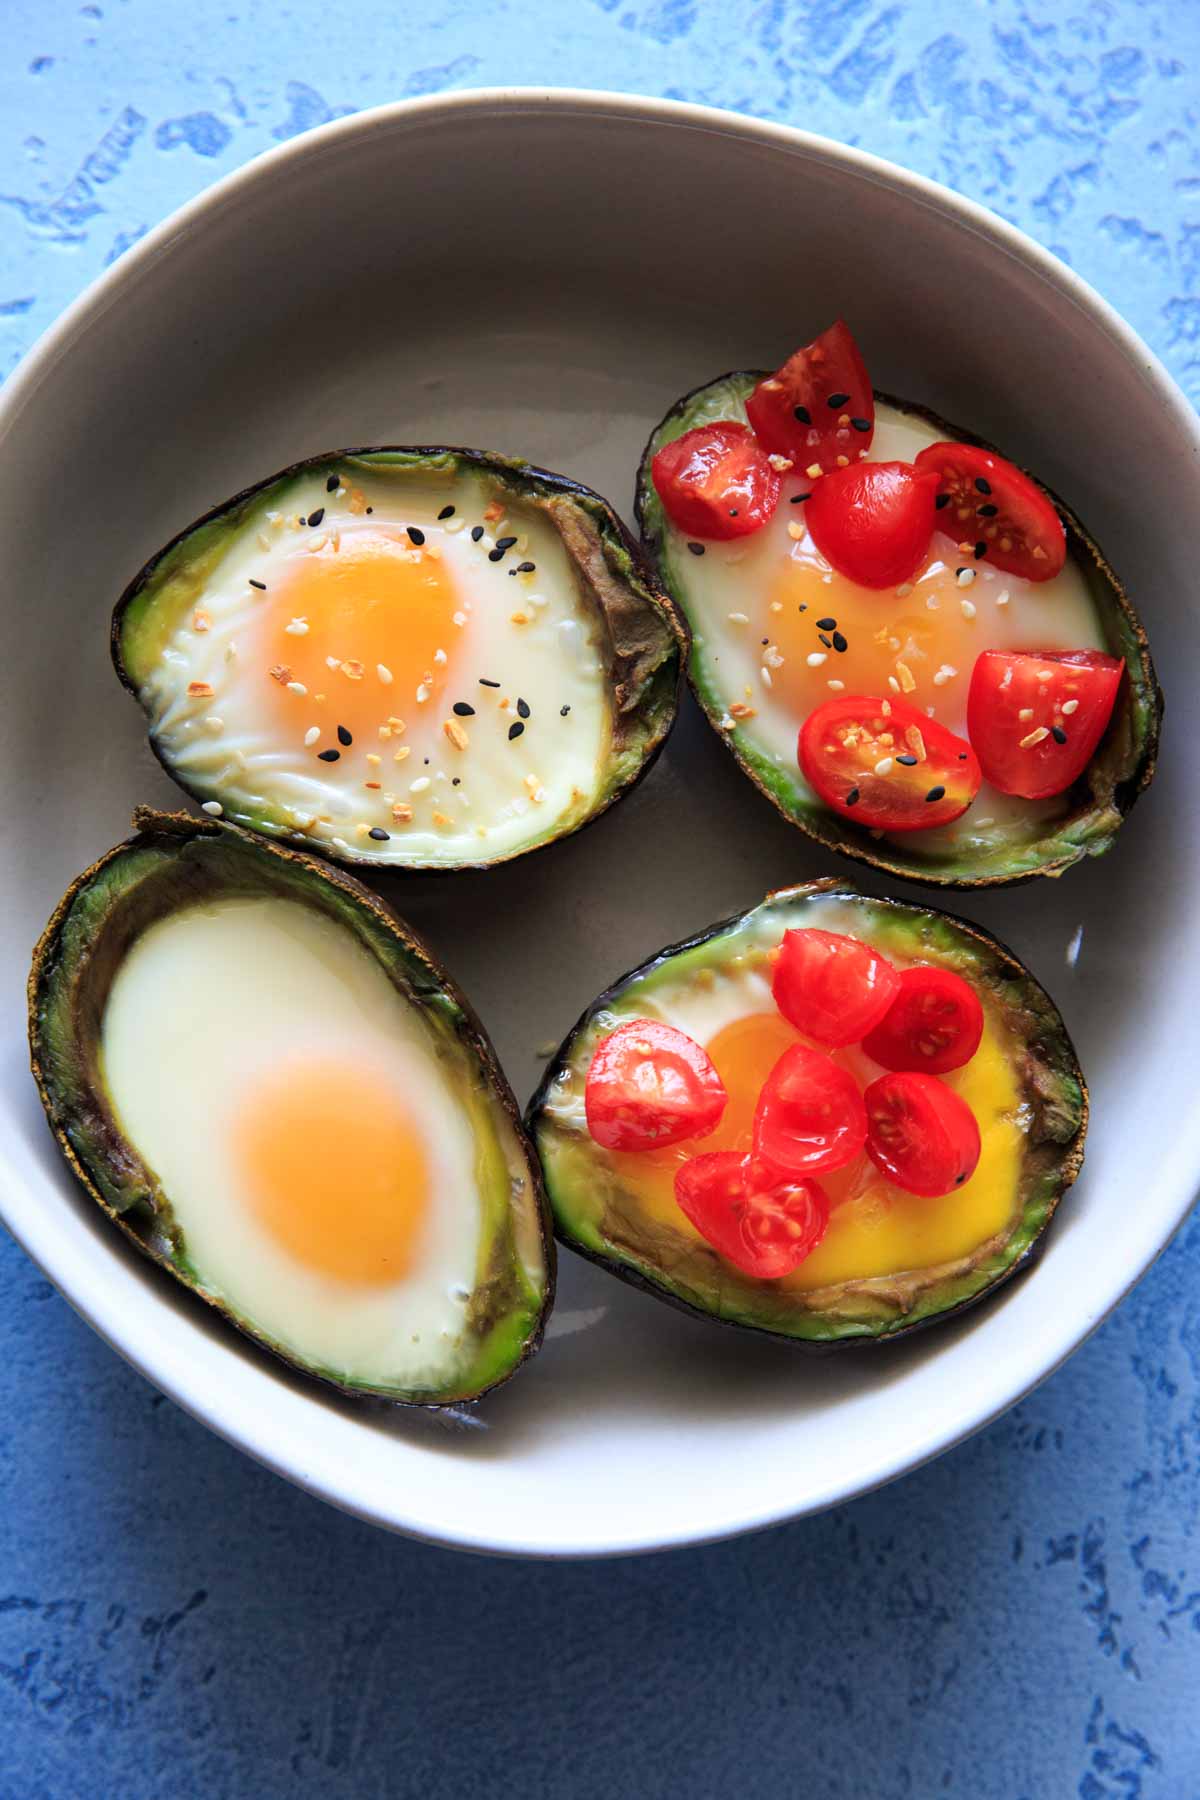 Baked Egg in Avocado's (Avocado "Nests") are a fun way to have a balanced snack or breakfast. Customizable with toppings and will last a day or two in the fridge, so you can bake ahead if needed! Low-carb, protein, fiber and healthy fats.